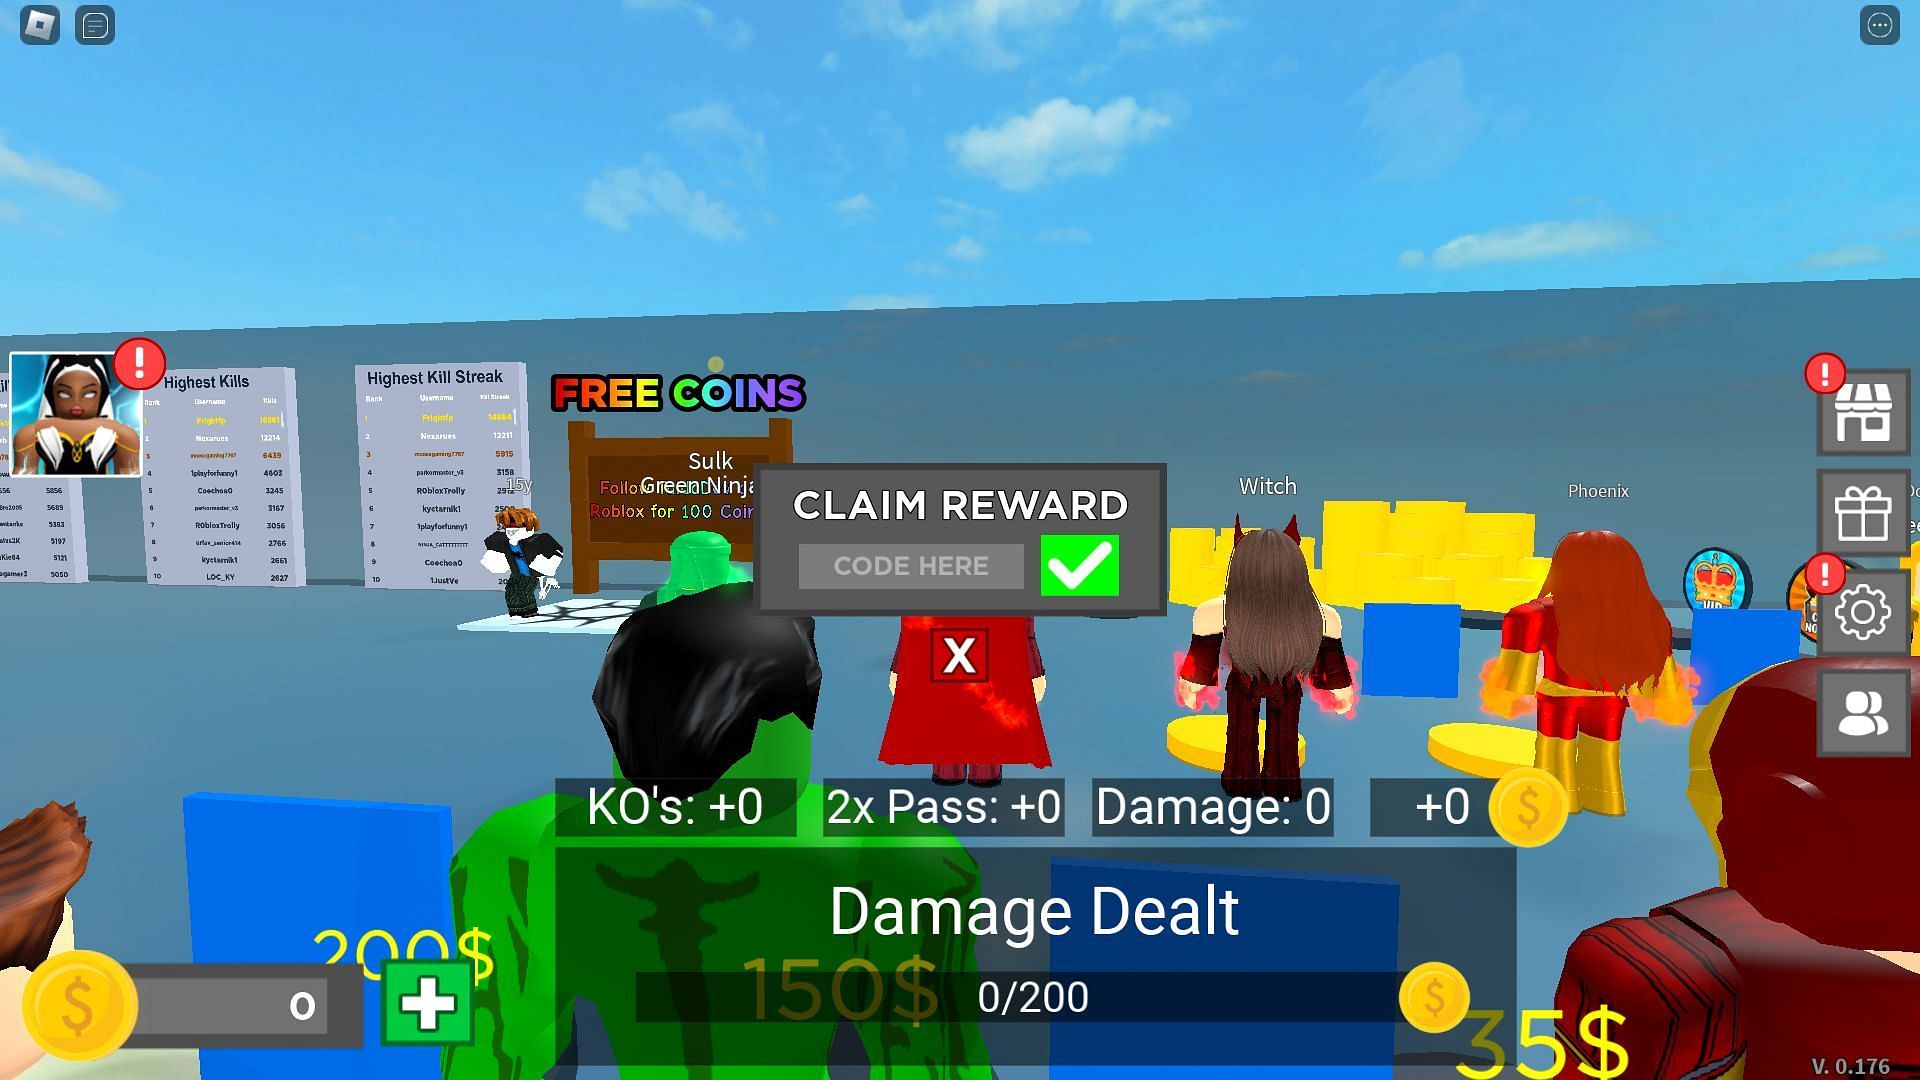 Active codes for Multiverse Battlegrounds (Image via Roblox)